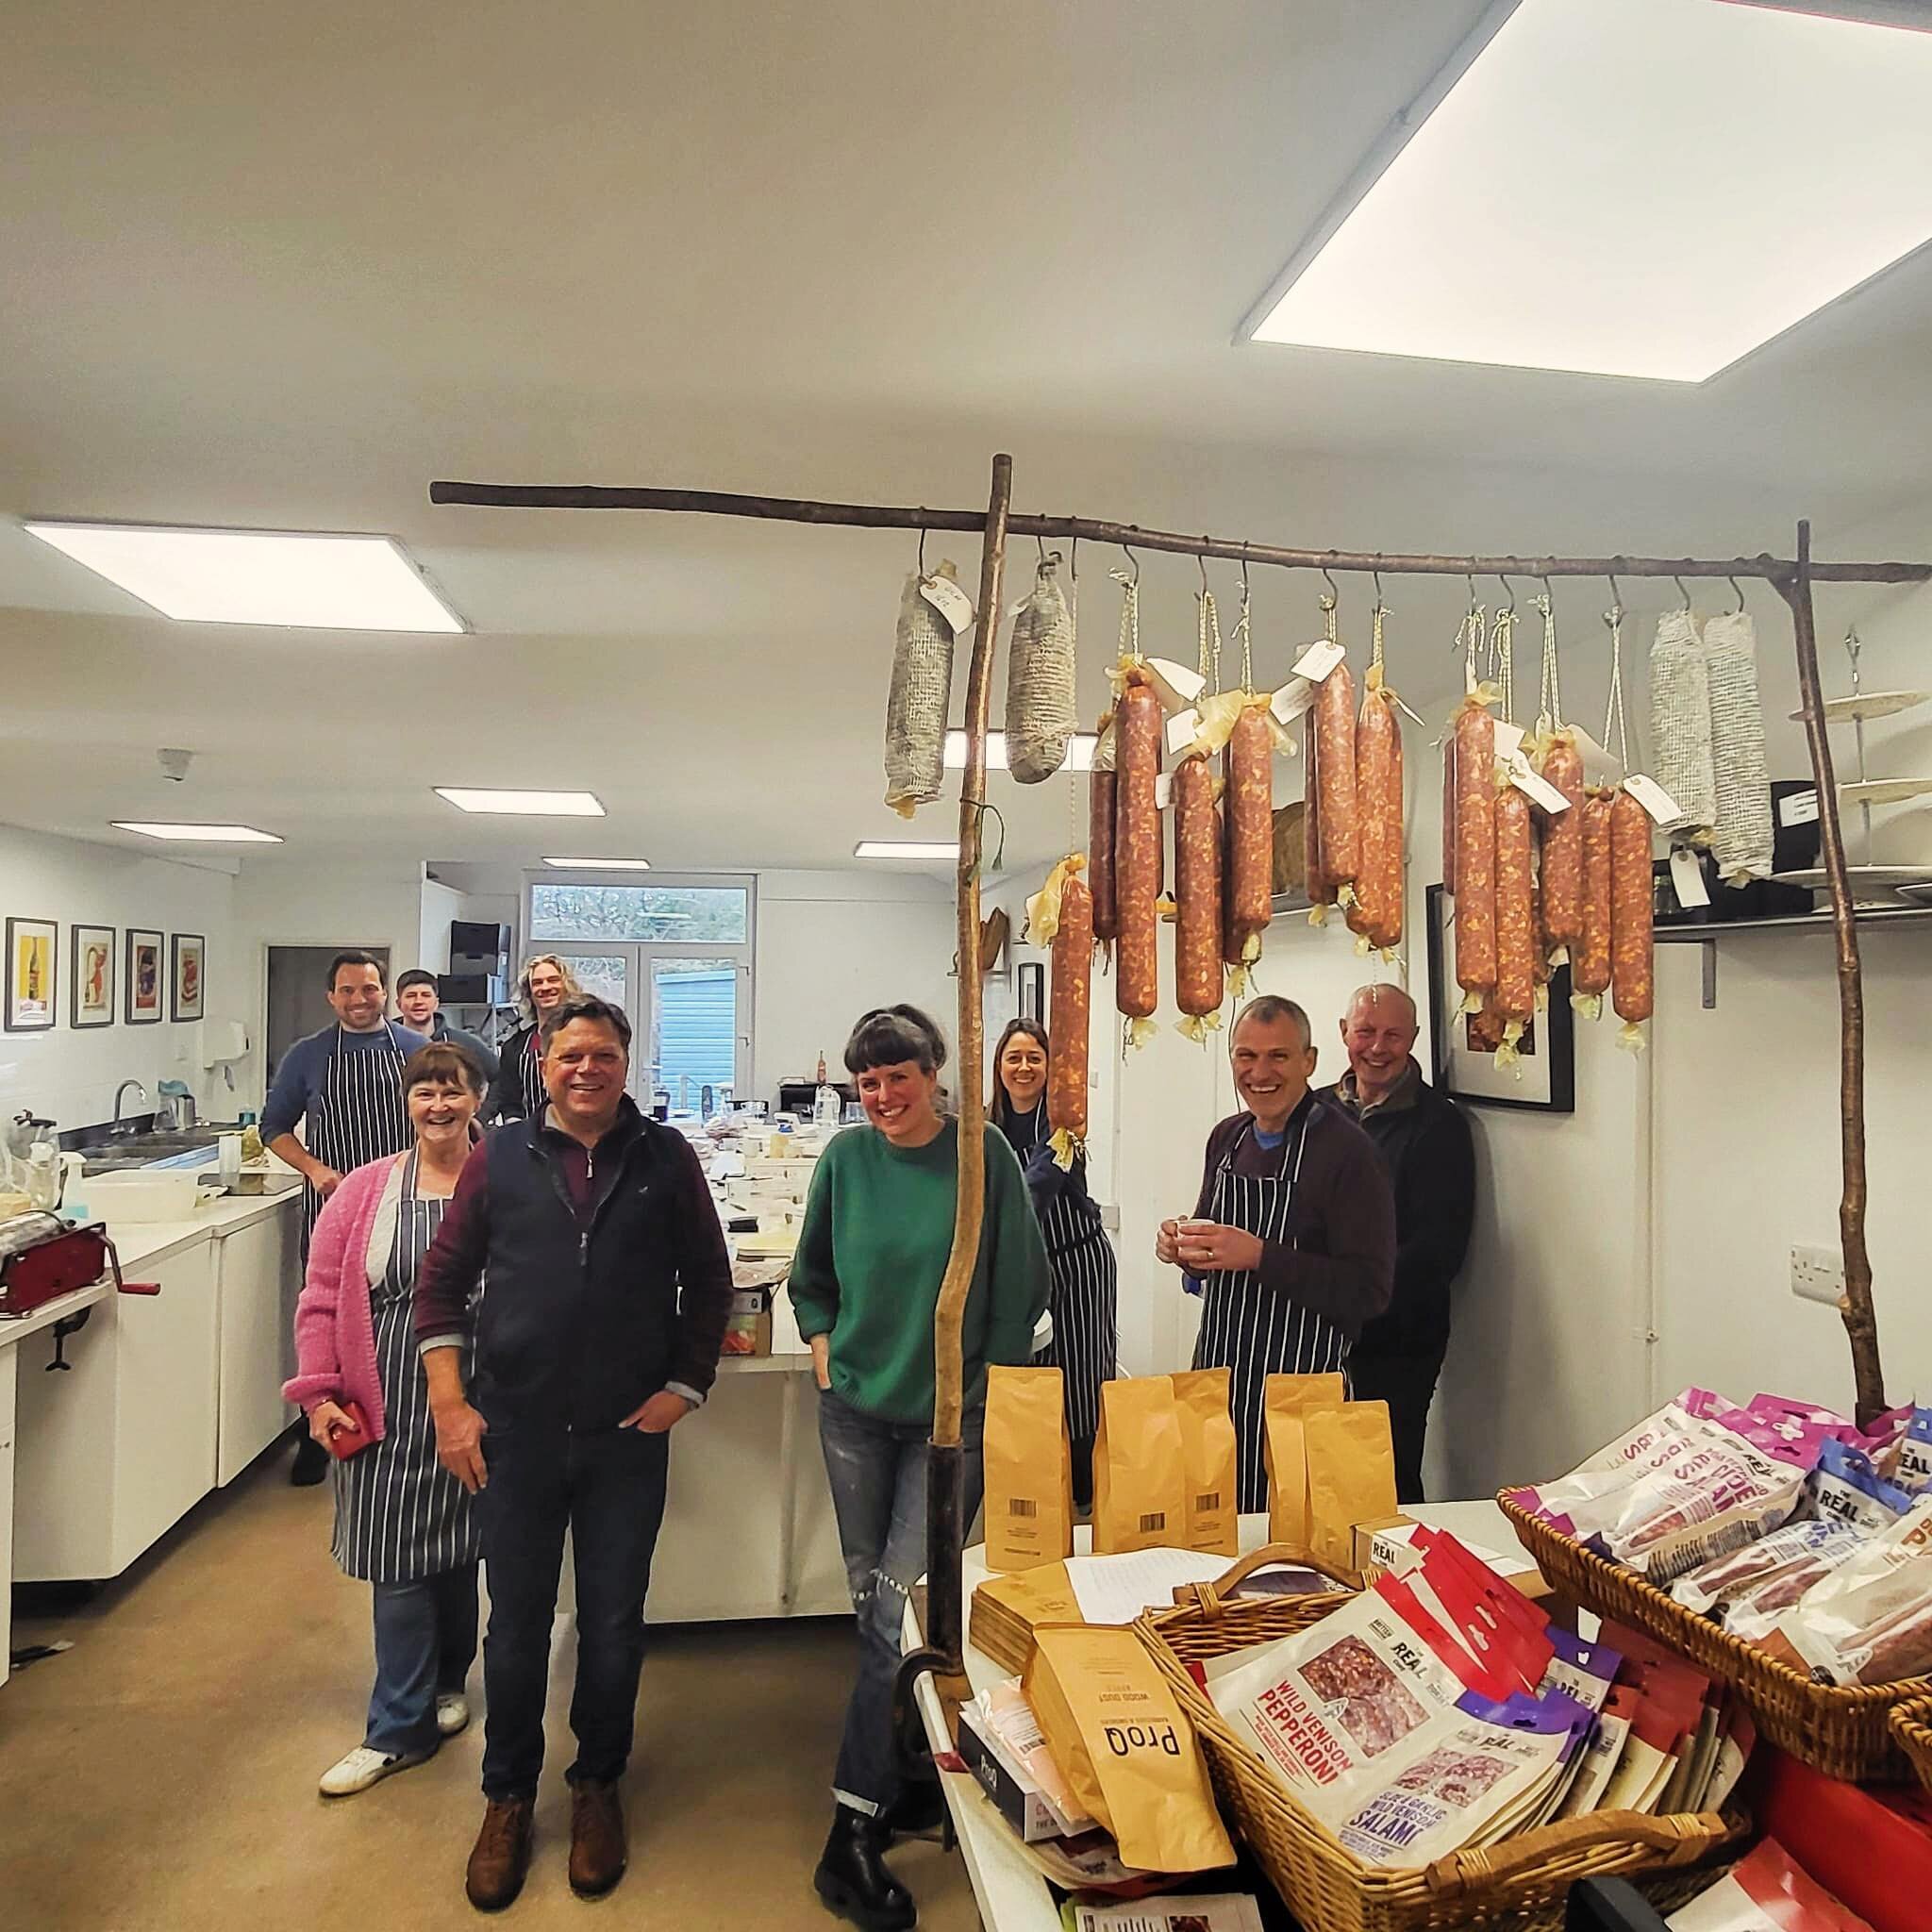 Another brilliant weekend hosting our hands-on charcuterie courses. Wonderful groups of cured meat enthusiasts, thanks to all who booked. Spring courses now sold out other than a few spaces on the 21st April. Visit our website to book your place.